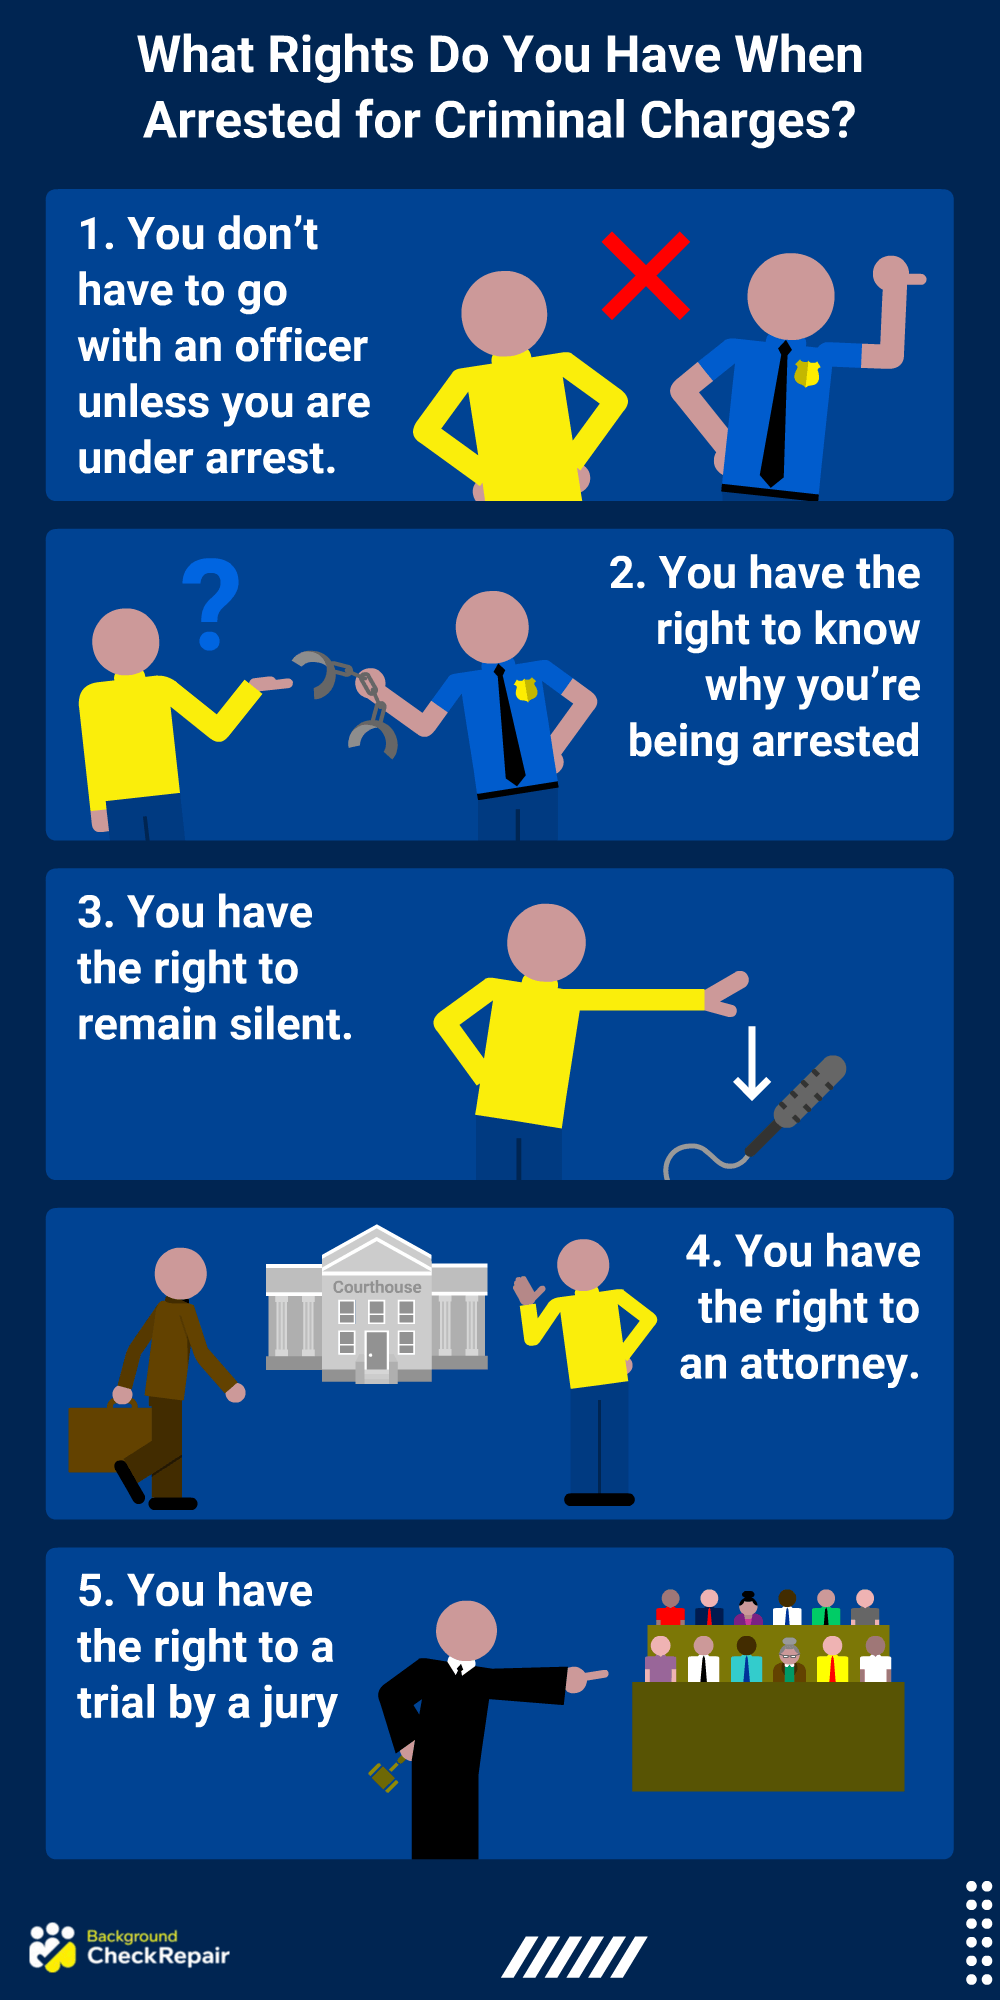 Graphic showing the rights you have when you're arrested and how to find out if criminal charges are filed before someone gets arrested, outlining the right to refuse to go with police without a warrant, the right to know why police are arresting you, the right to remain silent, the right to an attorney and the right to a trial by jury, depending on the type of criminal charges filed, and even if someone has pressed charges against you.